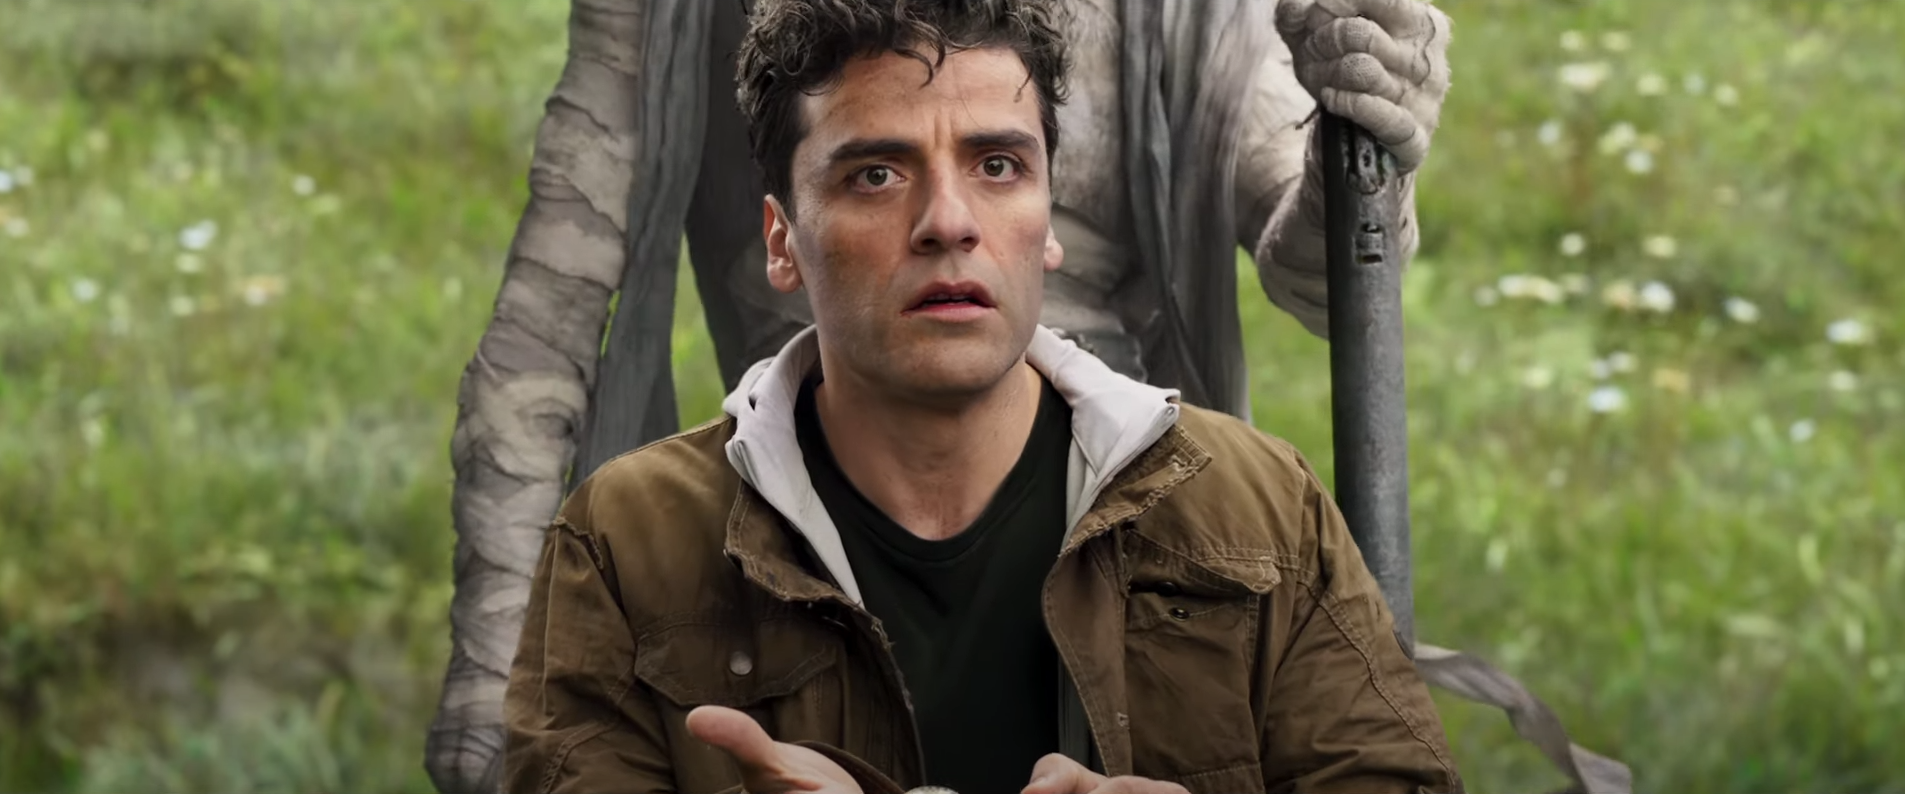 Oscar Isaac in Moon Knight with someone standing behind him